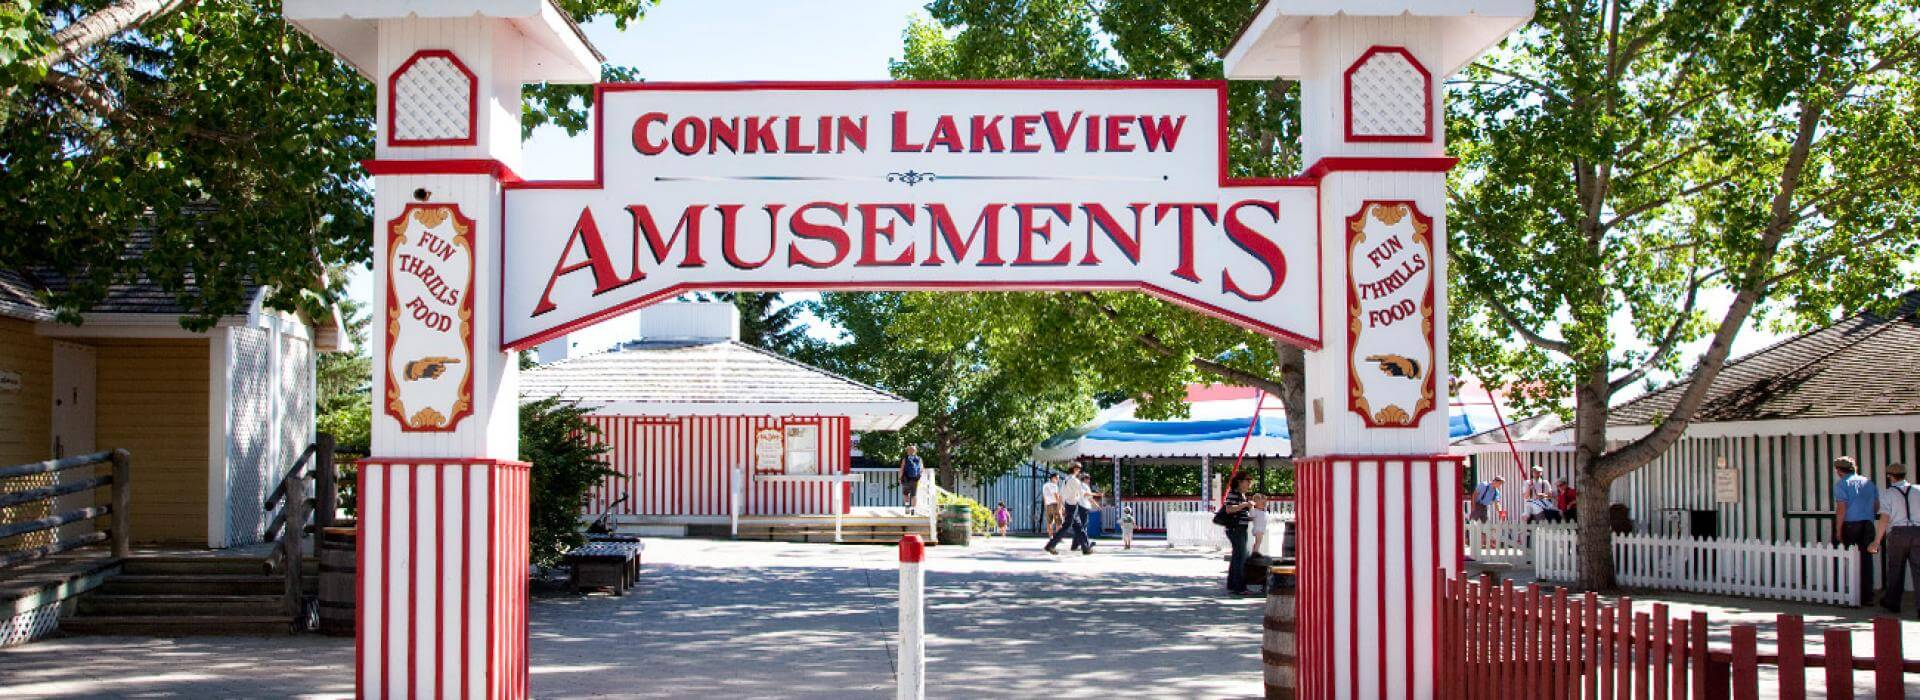 entrace of the amusement park with 2 pillars on the side and large sign in the middle saying Conklin Lakeview Amusements 